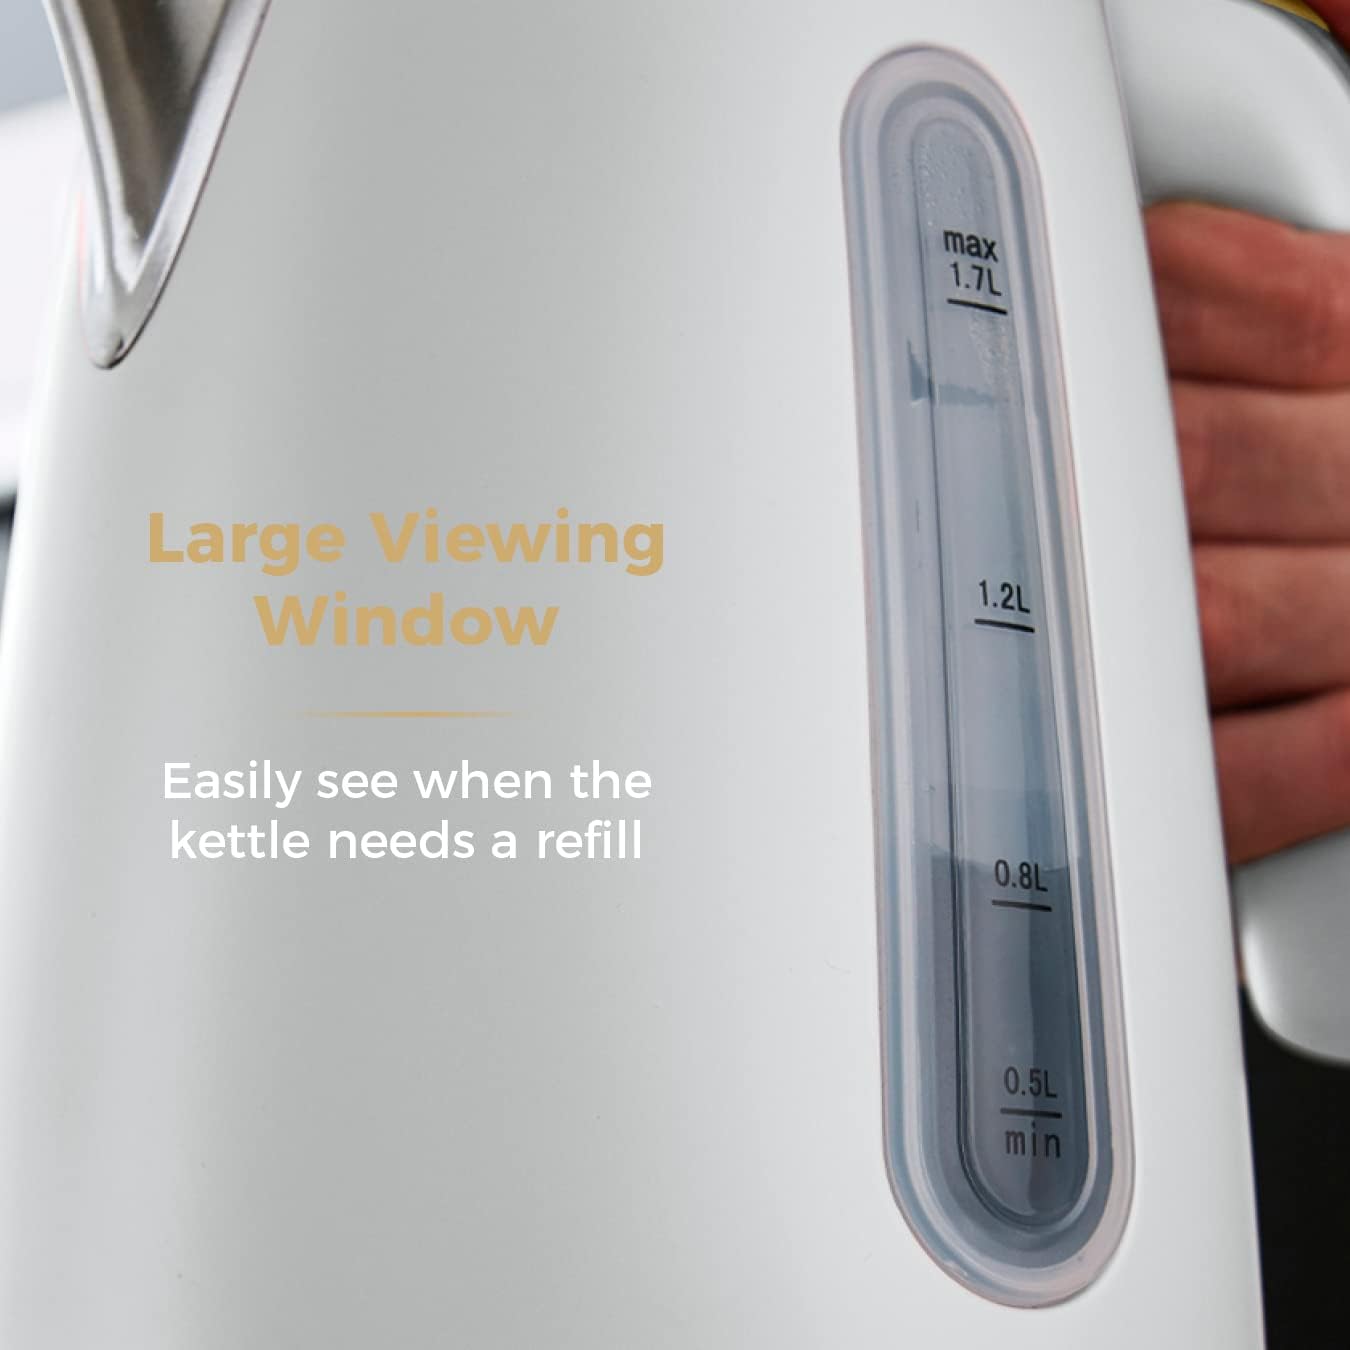 Tower Cavaletto 1.7 Litre Jug Kettle Optic White - 1400